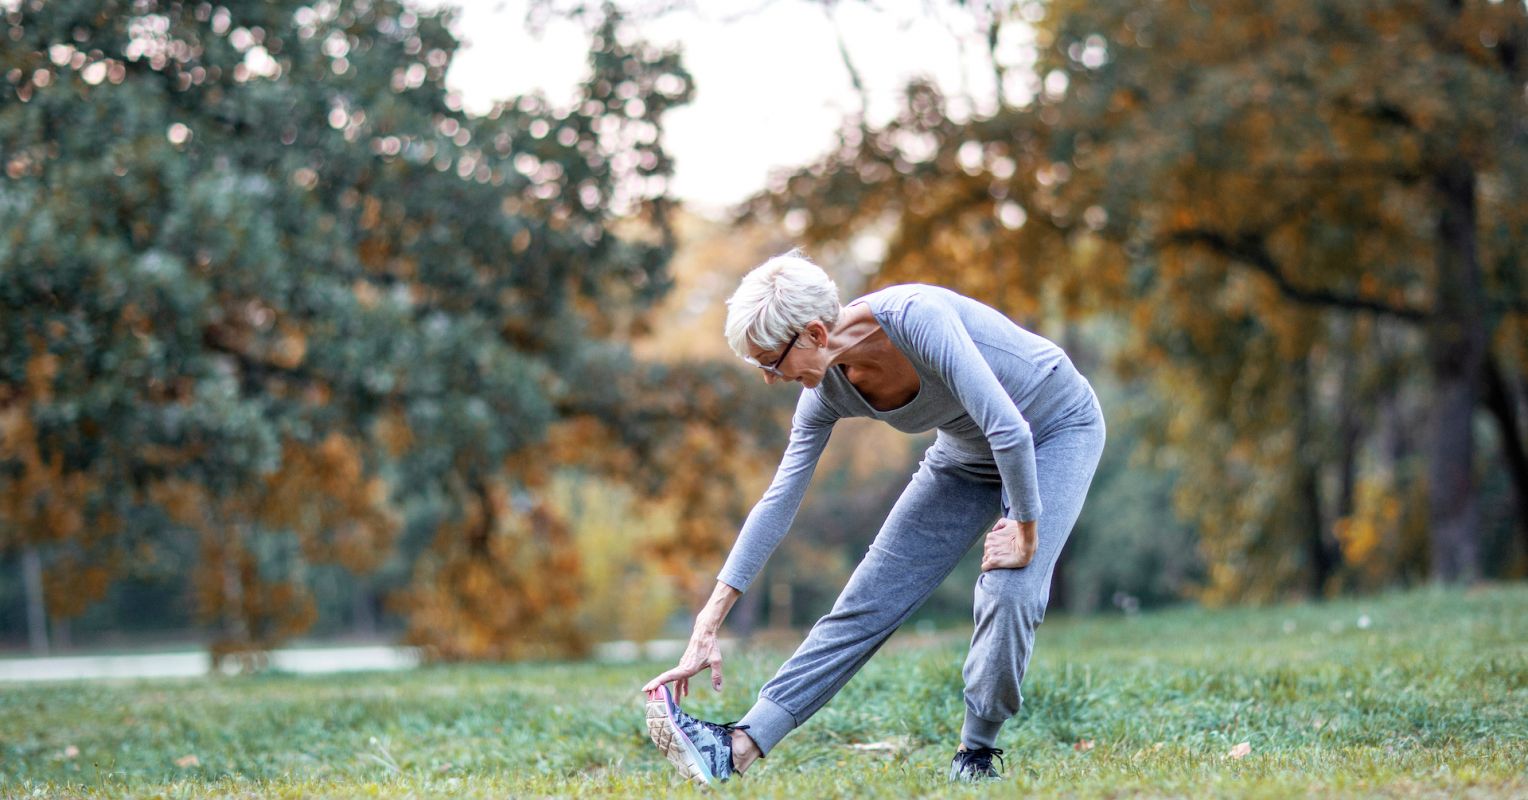 Can Exercise Reduce Your Cancer Risk?